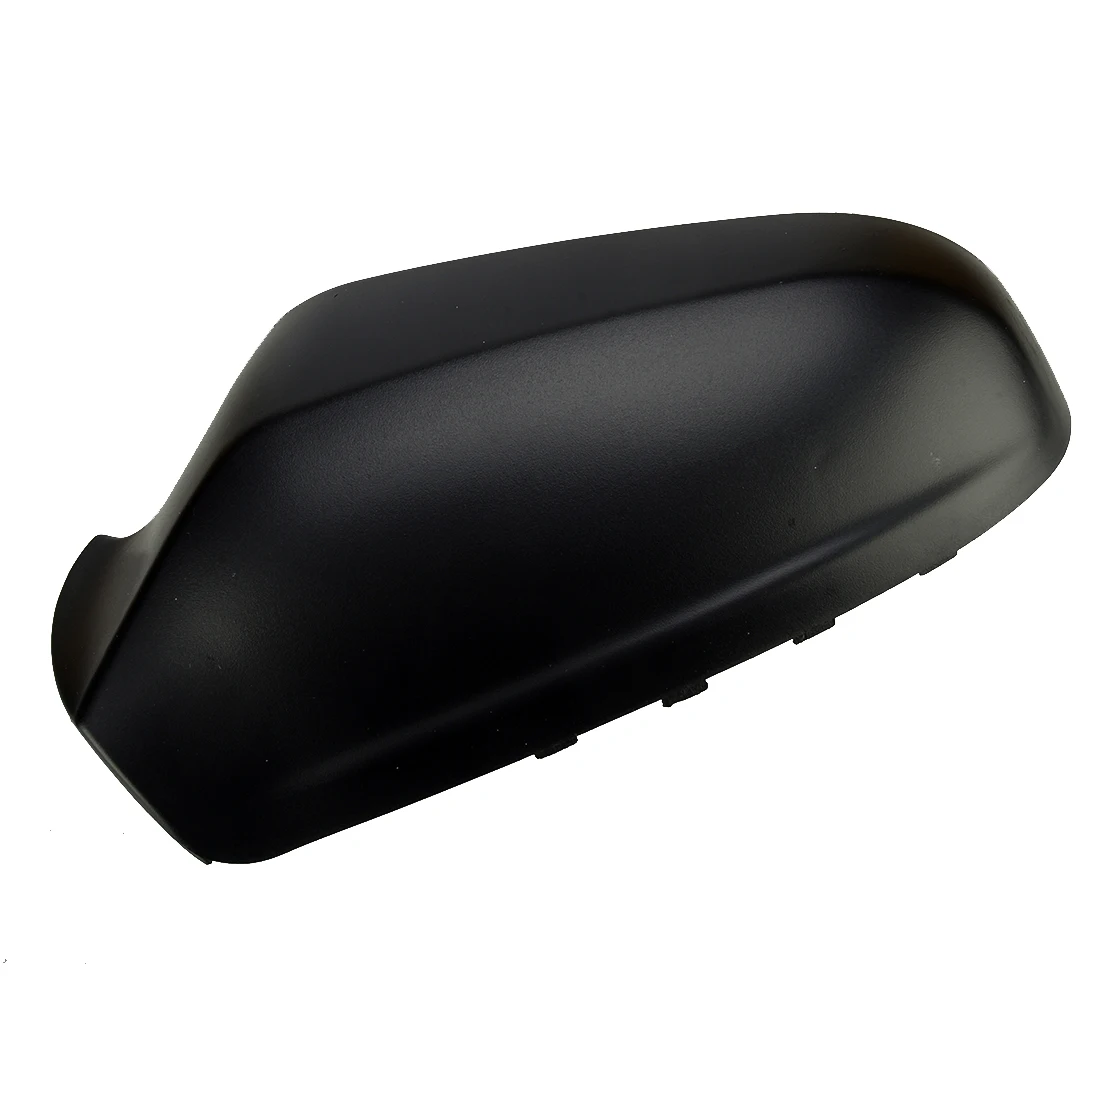 

6428200 6428917 6428925 Car Black Front Left Door Side Wing Rearview Mirror Cap Cover Housing Fit for Saturn Astra 2008-2010